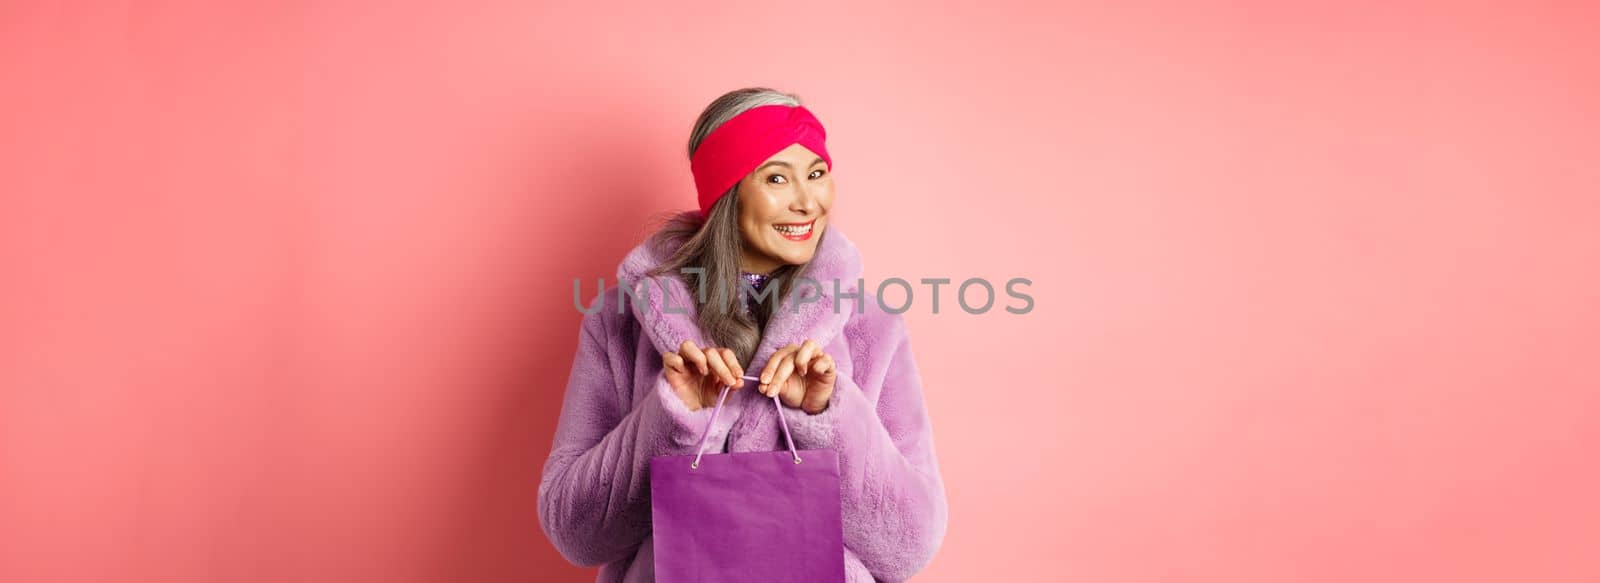 Shopping and fashion concept. Fashionable gradmother bought present and smiling, holding purple bag in hands, standing over pink background.